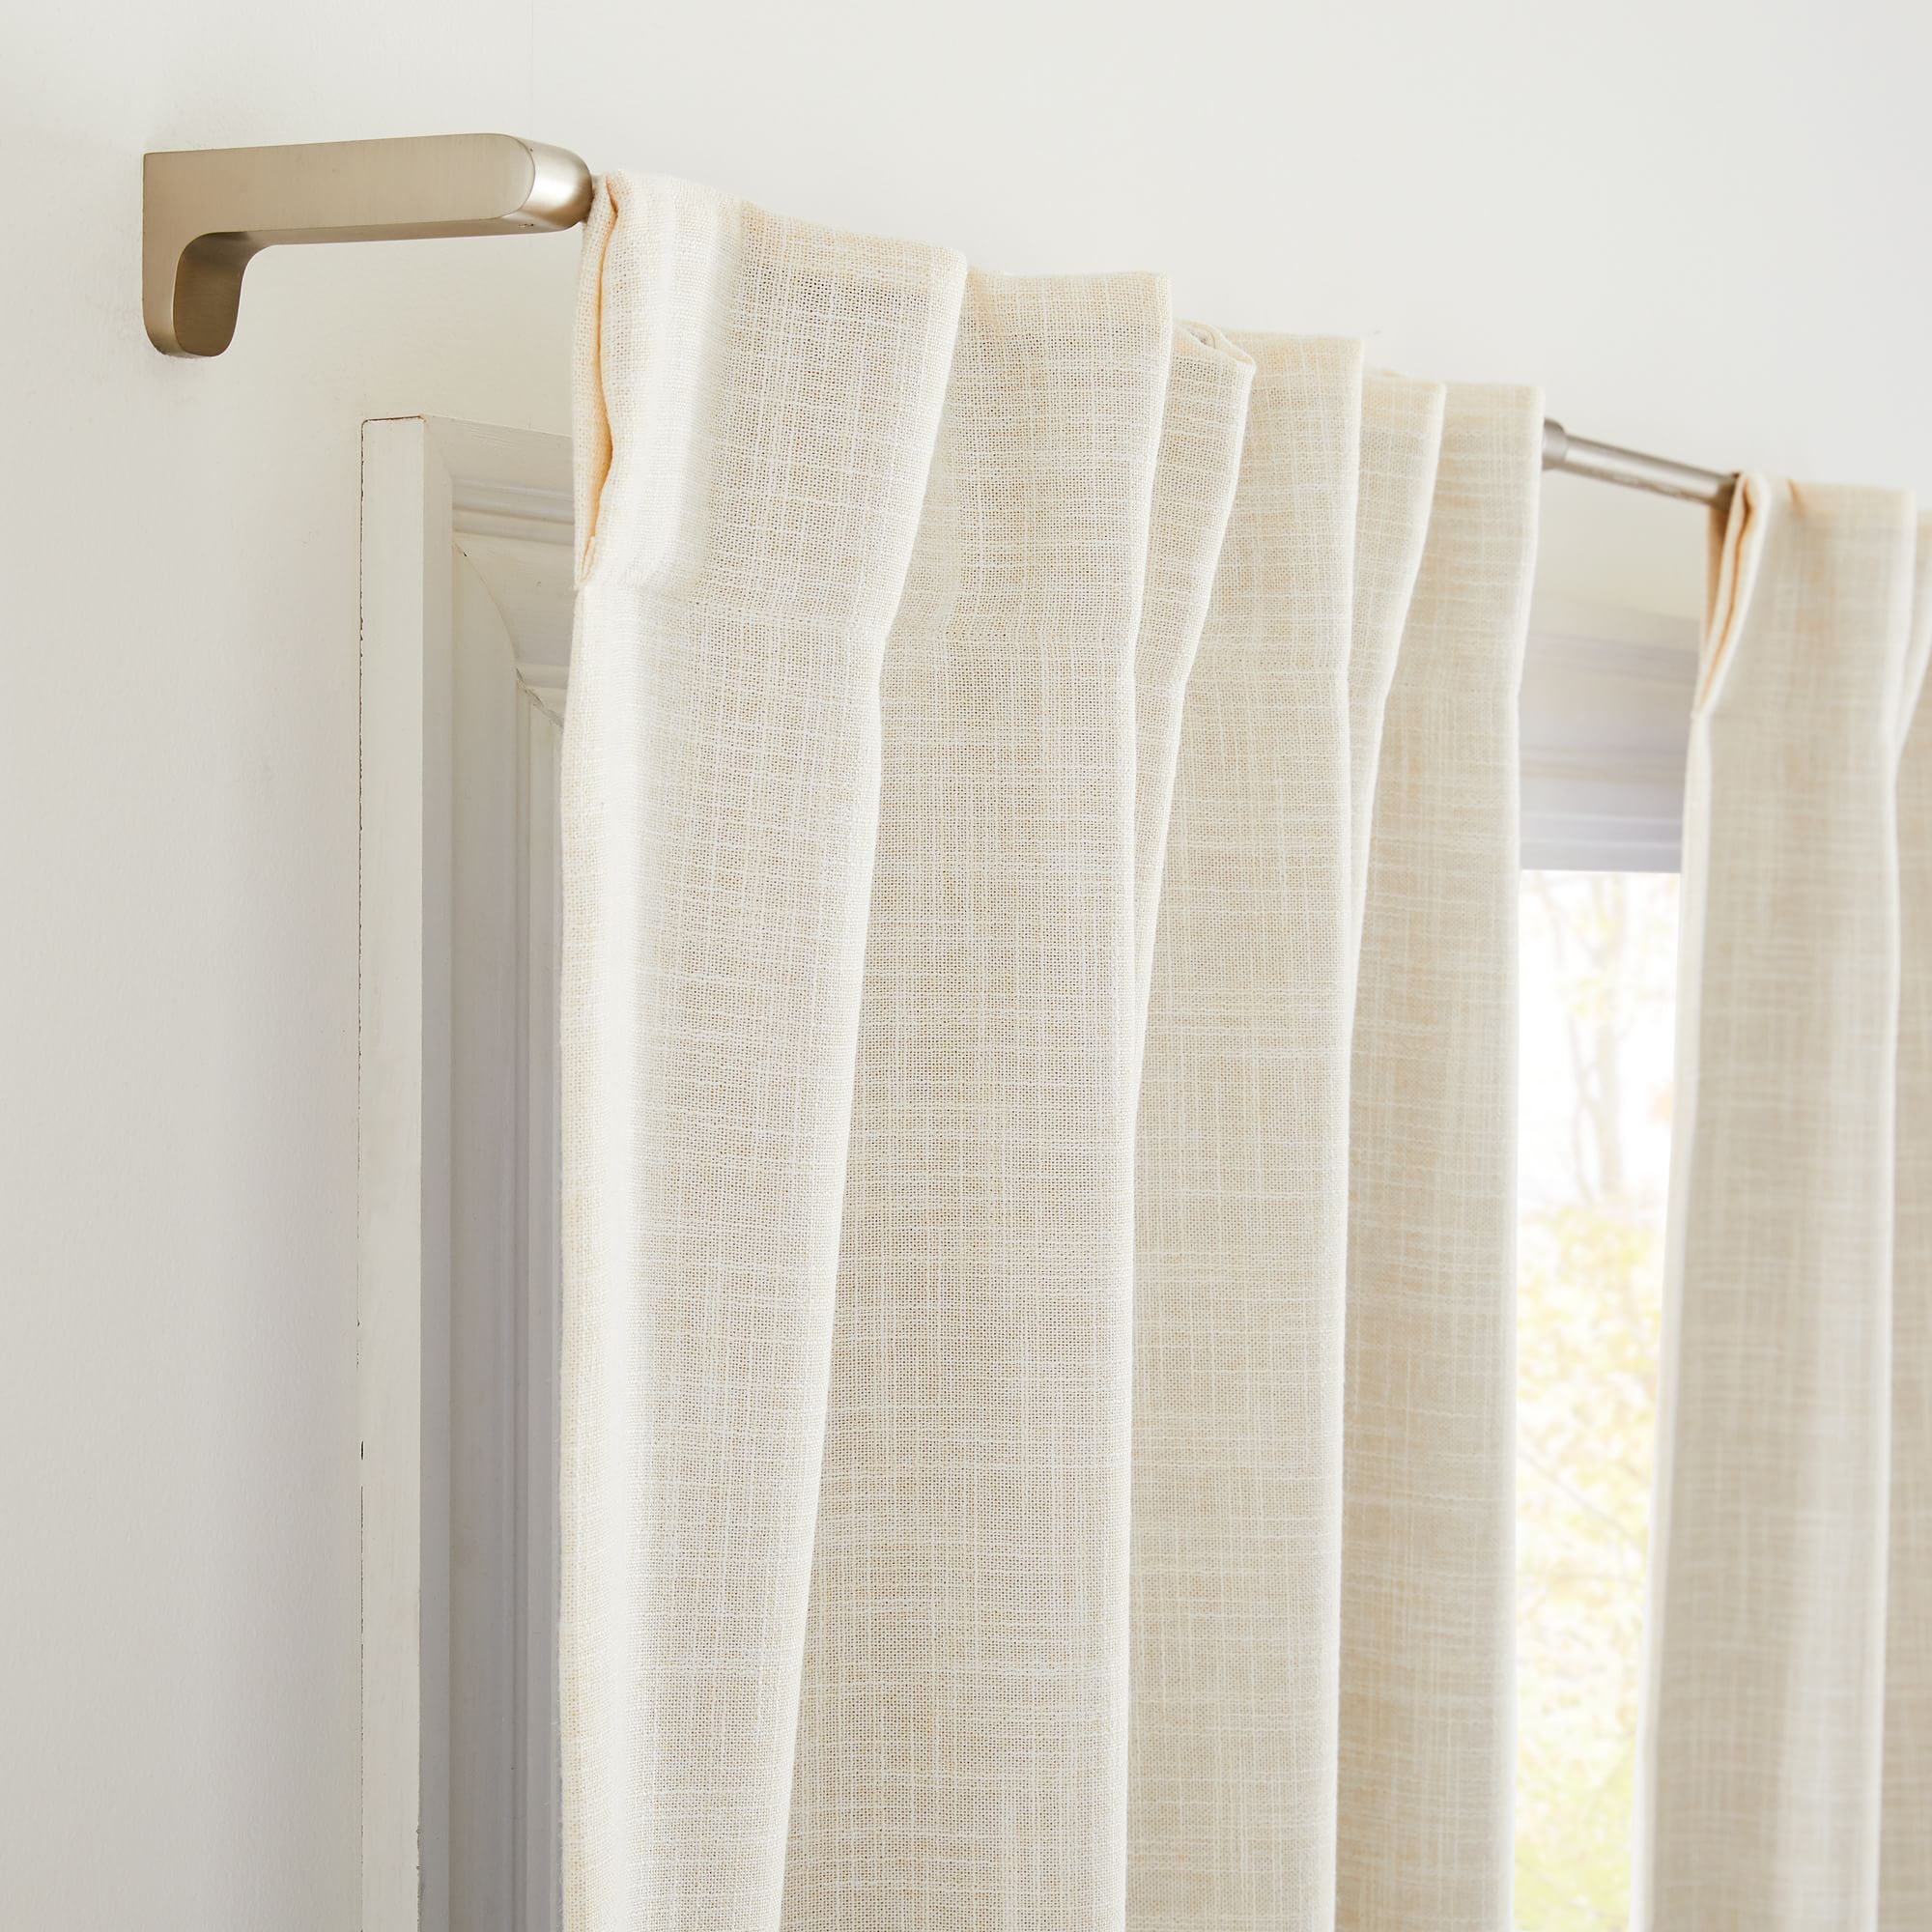 Crossweave Curtain with Blackout Lining, Stone White, 48"x84", Set of 2 - Image 2